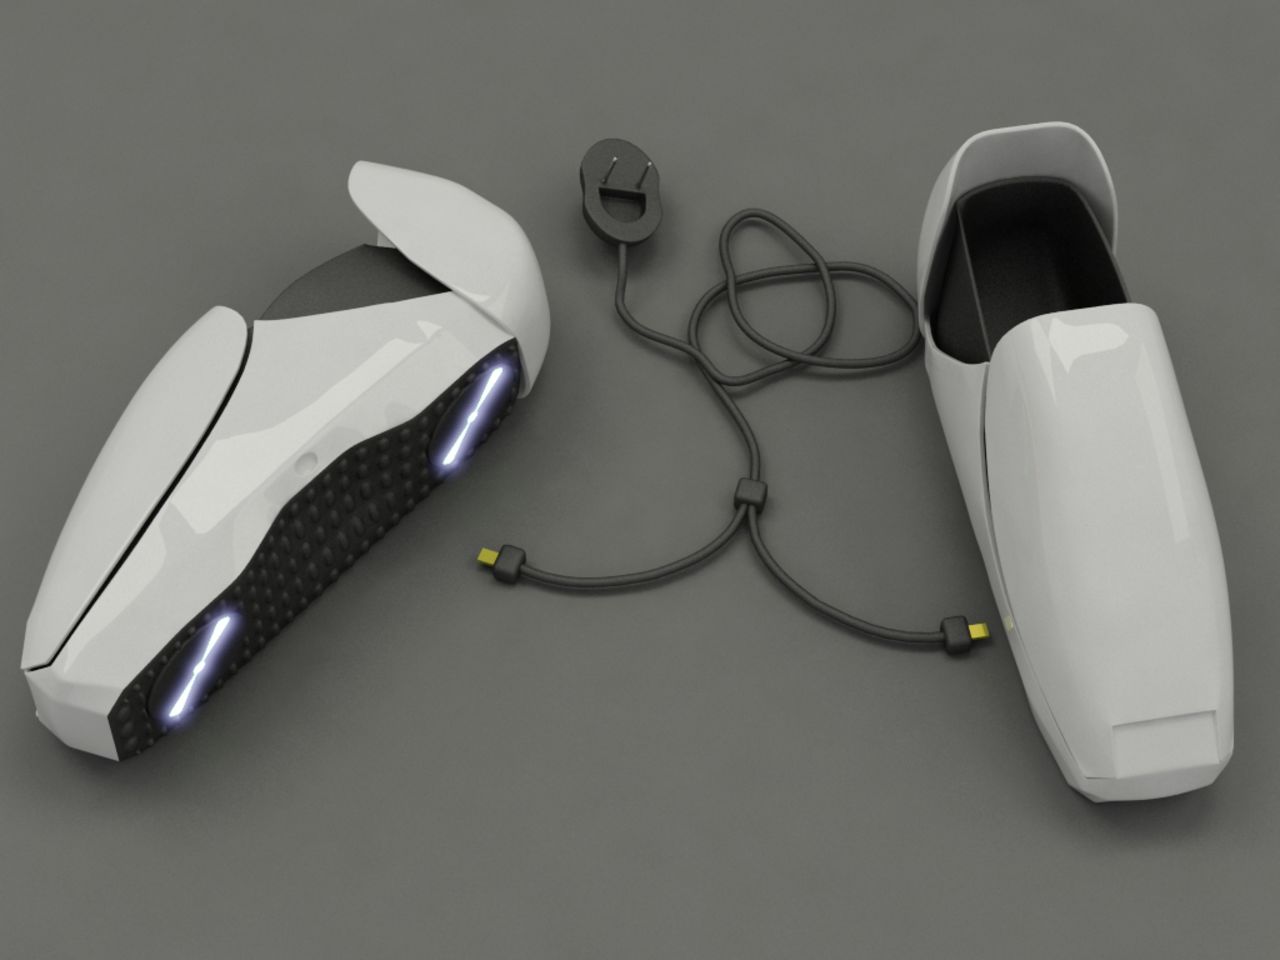 Rather than bringing dirt into your house, these shoes will clean it up. Looking like something out of Star Wars, the FOKI vacuum shoes are a concept from Indonesian product designer <a href="http://www.coroflot.com/crazydylus/portfolio" target="_blank" target="_blank">Adika Titut Triyugo</a>. They are equipped with a pair of rotary cleaners on the sole of each shoe and a LED display on top that indicates battery life and cleaning progress. So be a trooper and go vacuum.